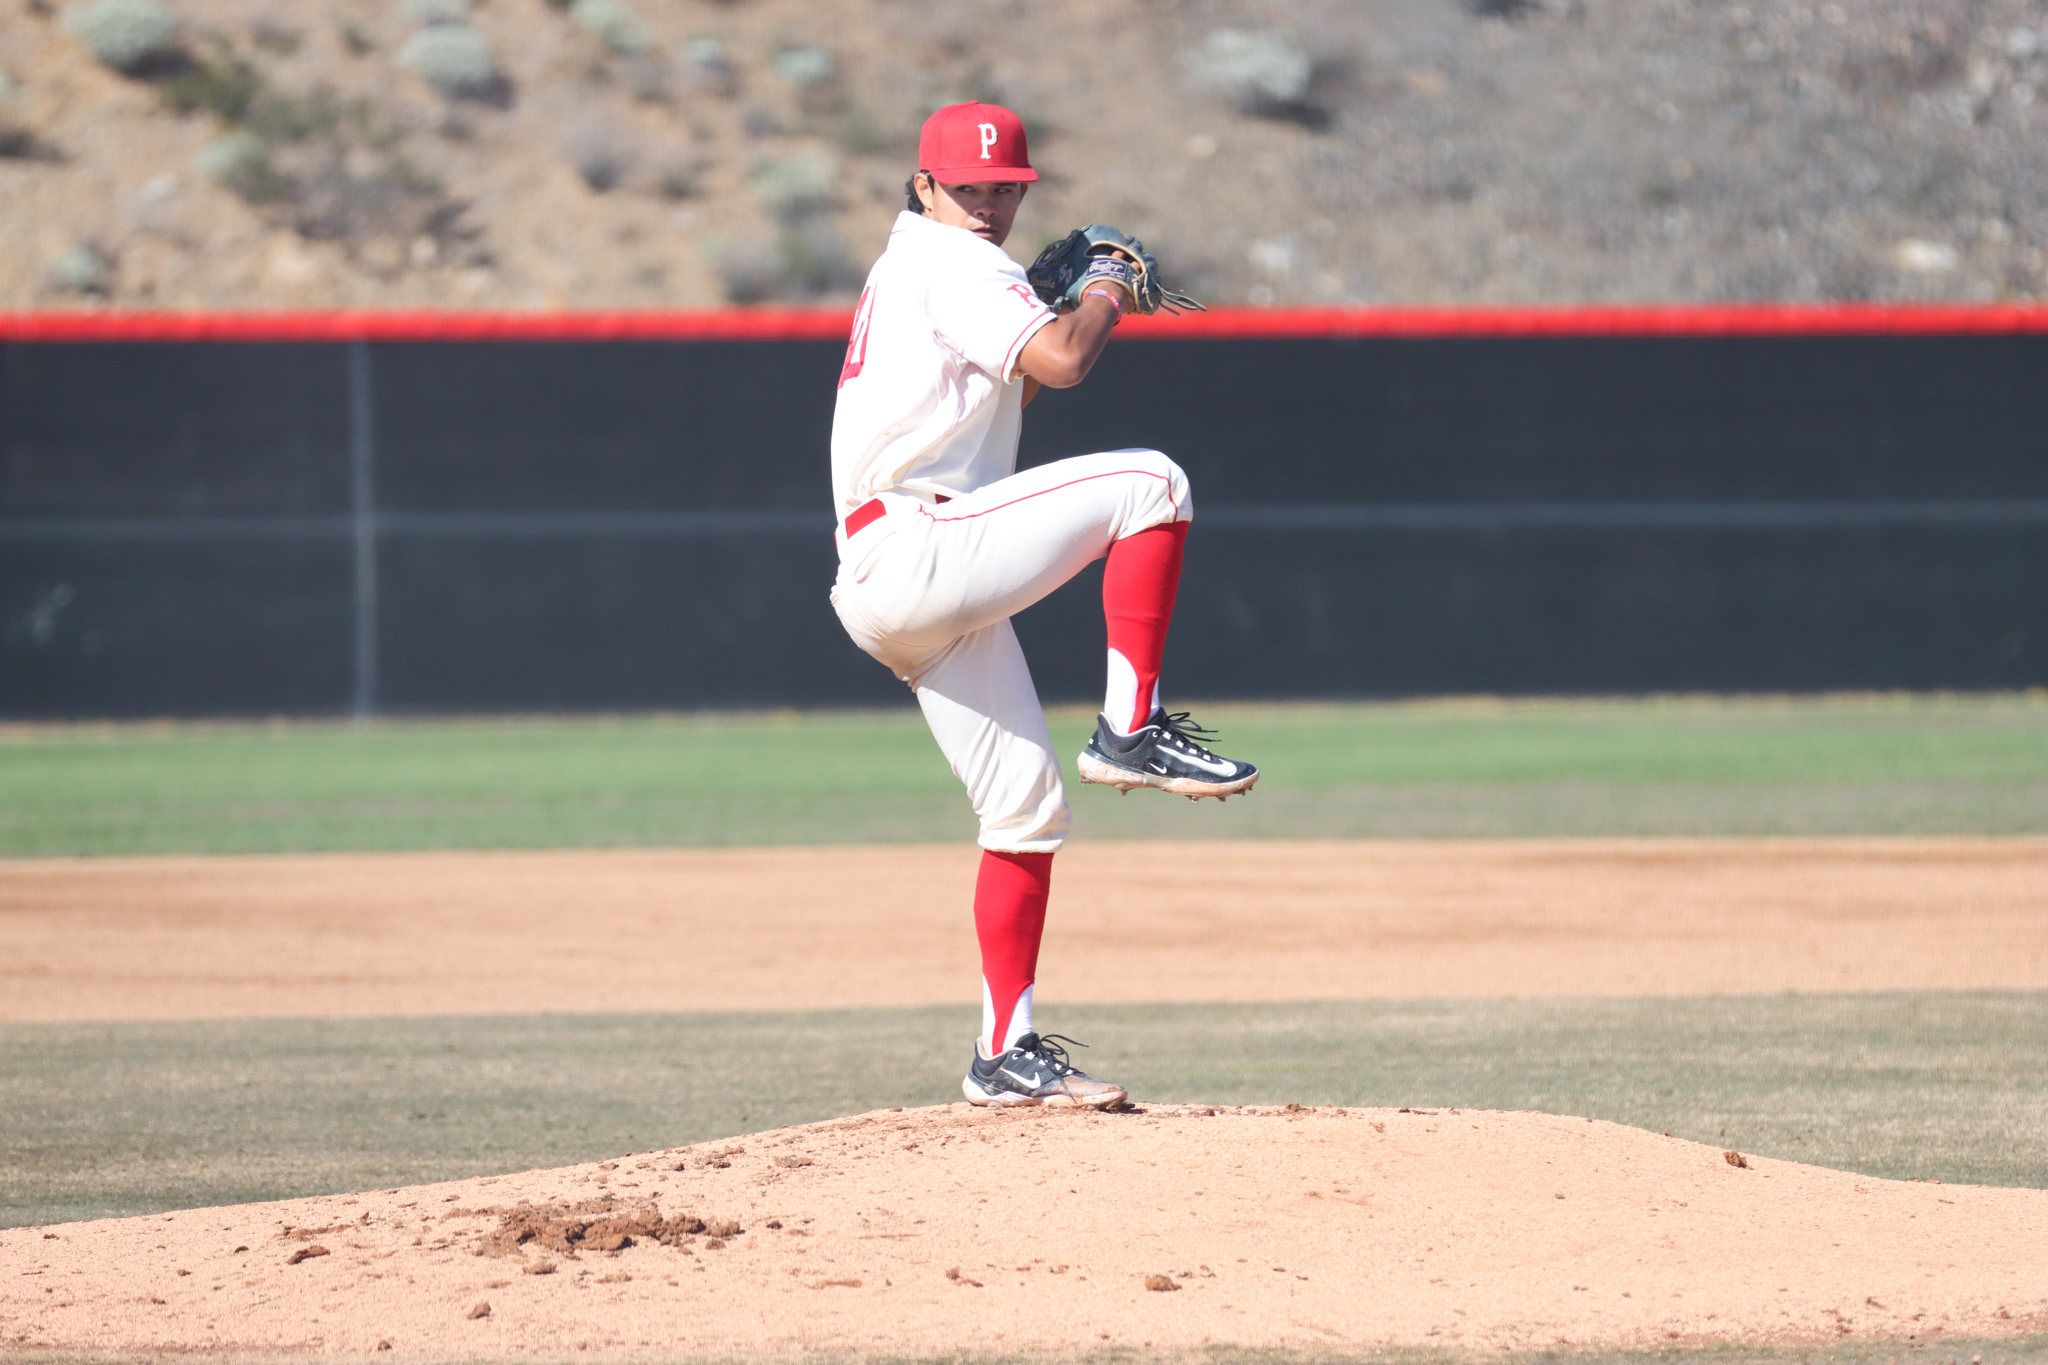 Kyle Carr pitched seven shutout innings with 10 strikeouts. Photo by Cara Heise.